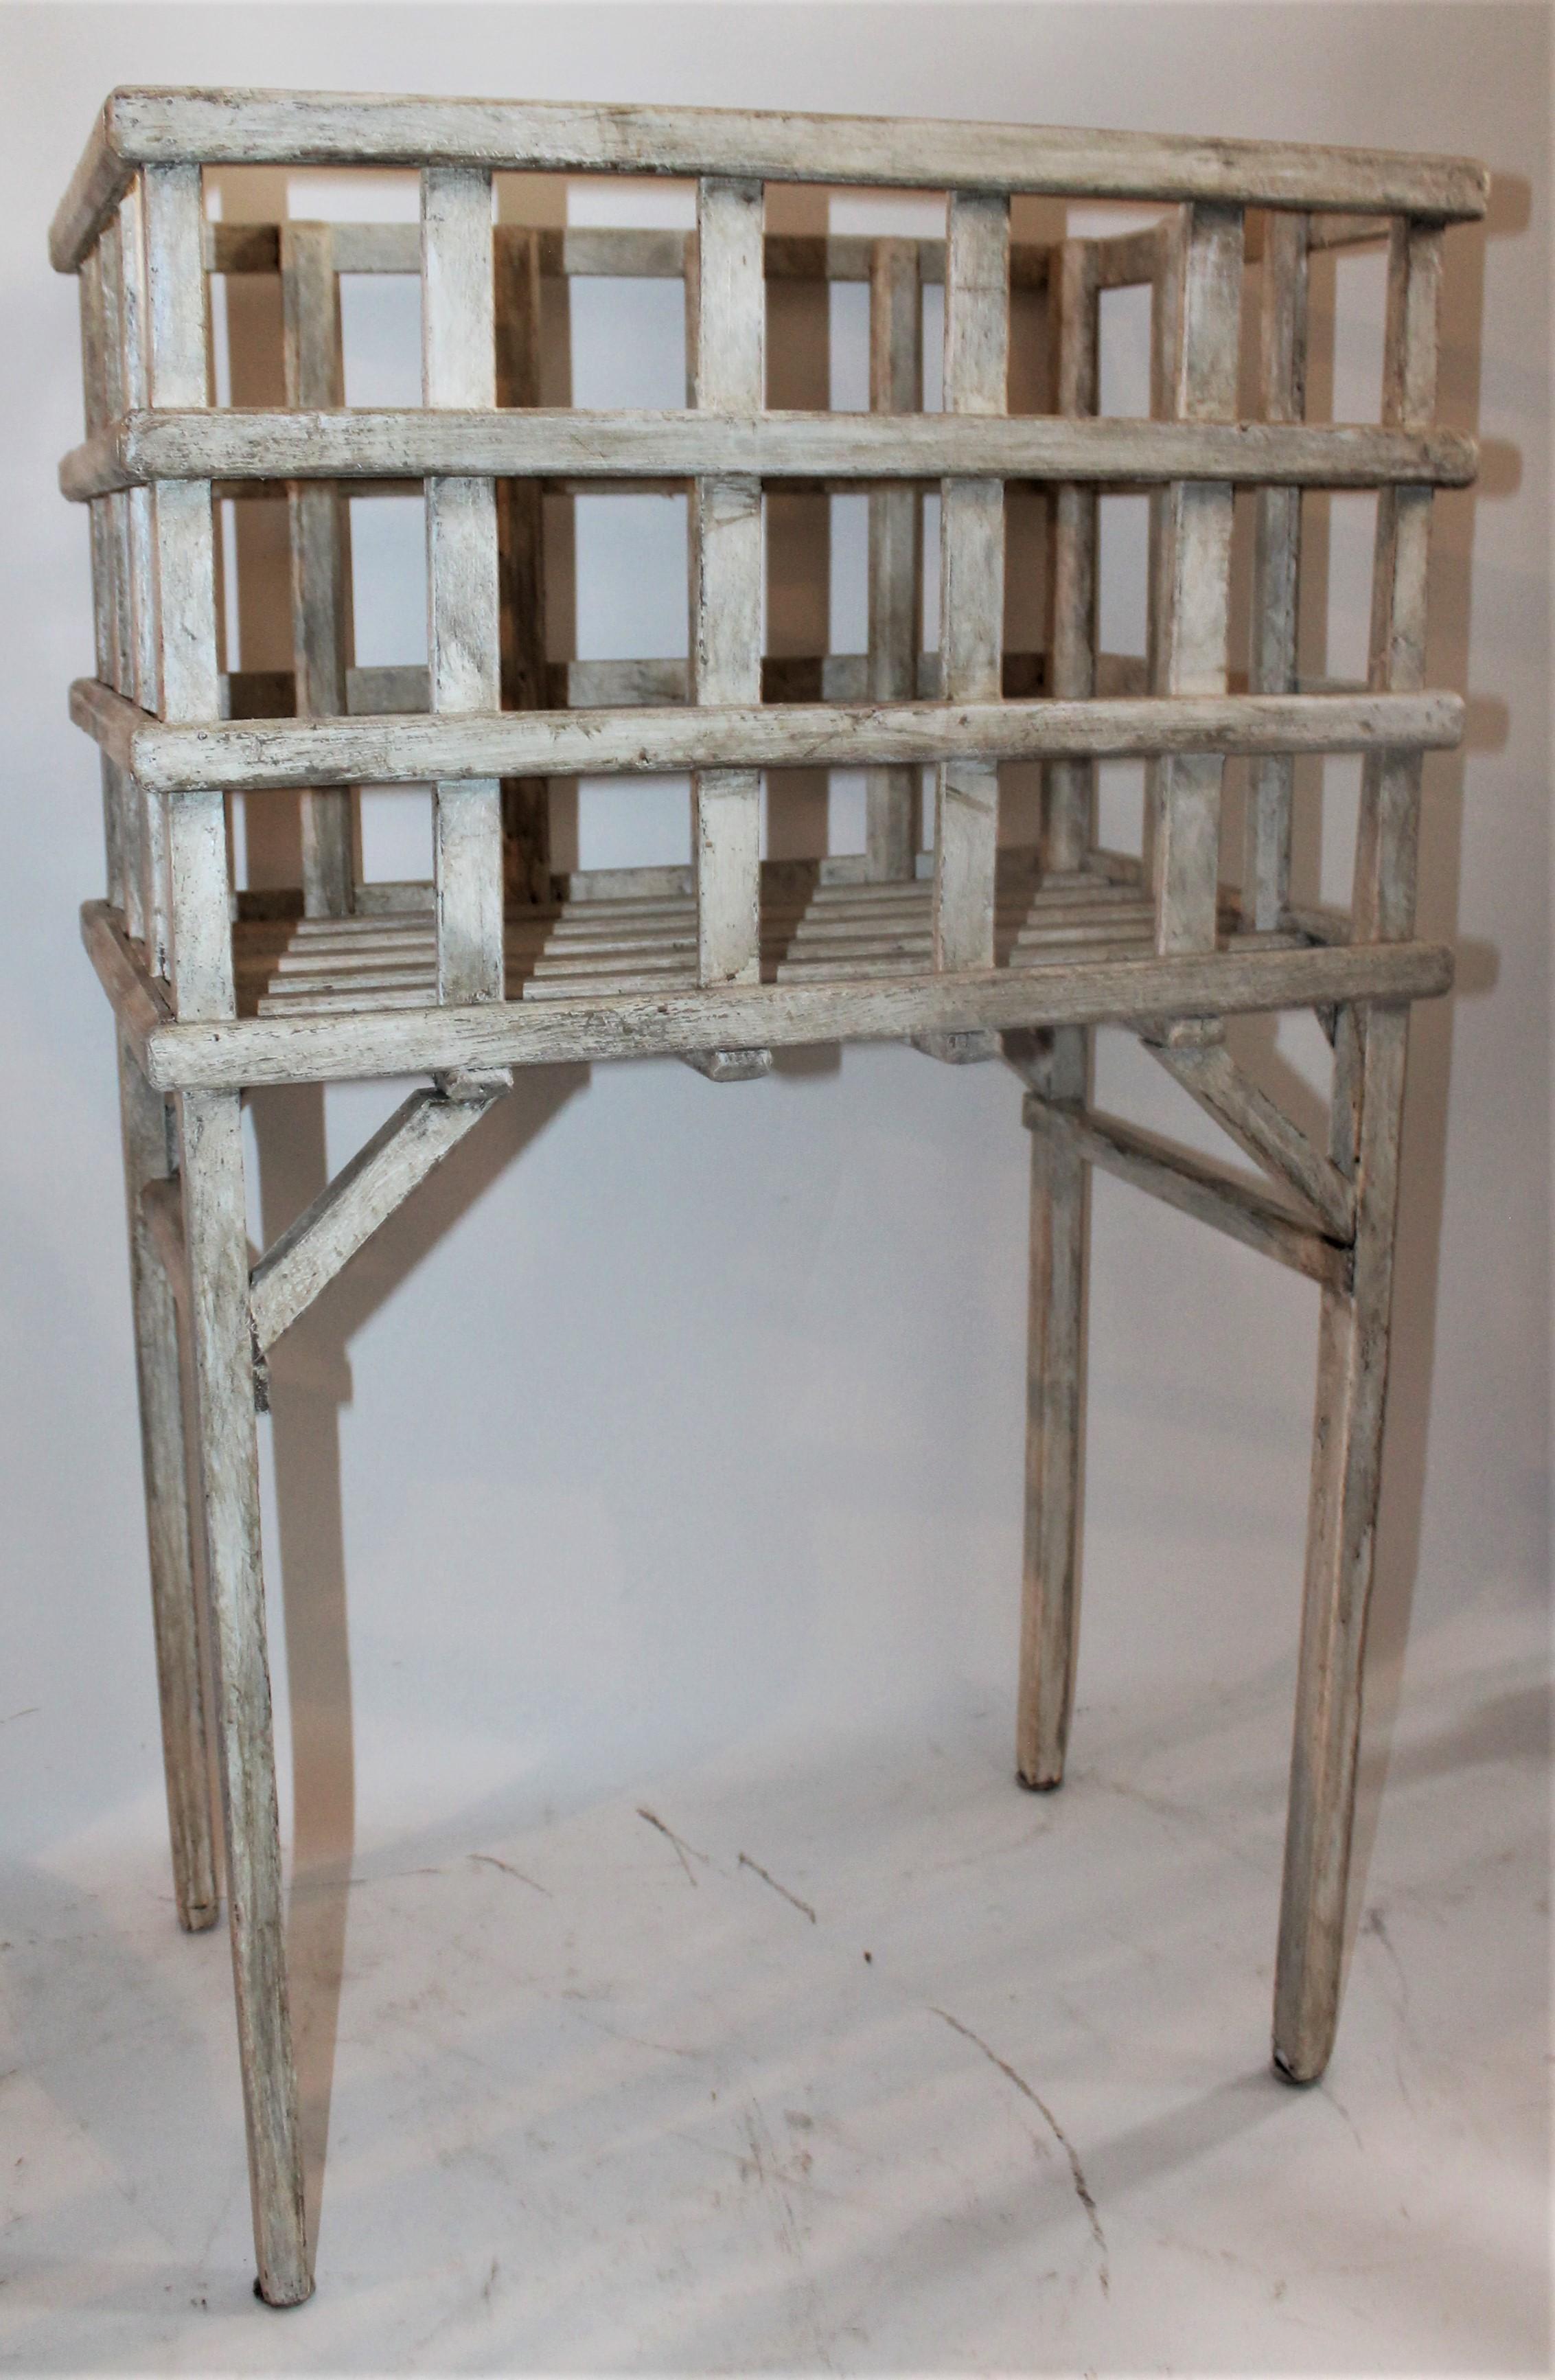 19th century old white over sage green painted basket on legs. It looks like a cage like display or holder of some sort. Great for a hooked rug or quilt collection.